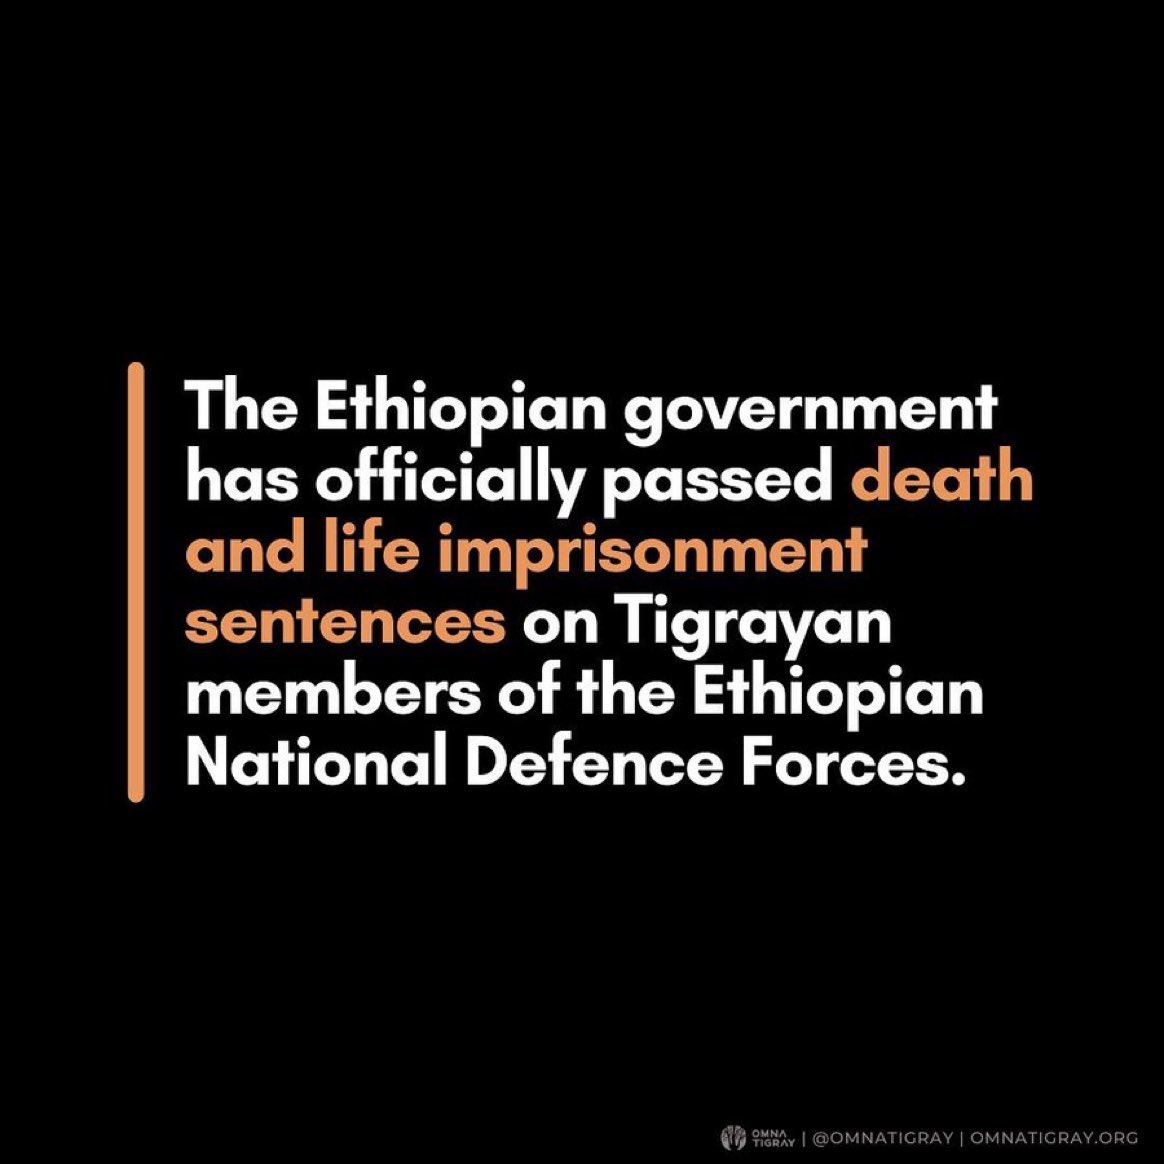 '...at least 83 Tigrayan former ENDF patriots were killed in Arba Minch concentration camps. This does not include a massacre in Awash arba, Jigjiga & other concentration camps. #TigrayGenocide @UN_HRC @antonioguterres @LaetitiaBader @MikeHammerUSA #EU x.com/realhaulegluck…